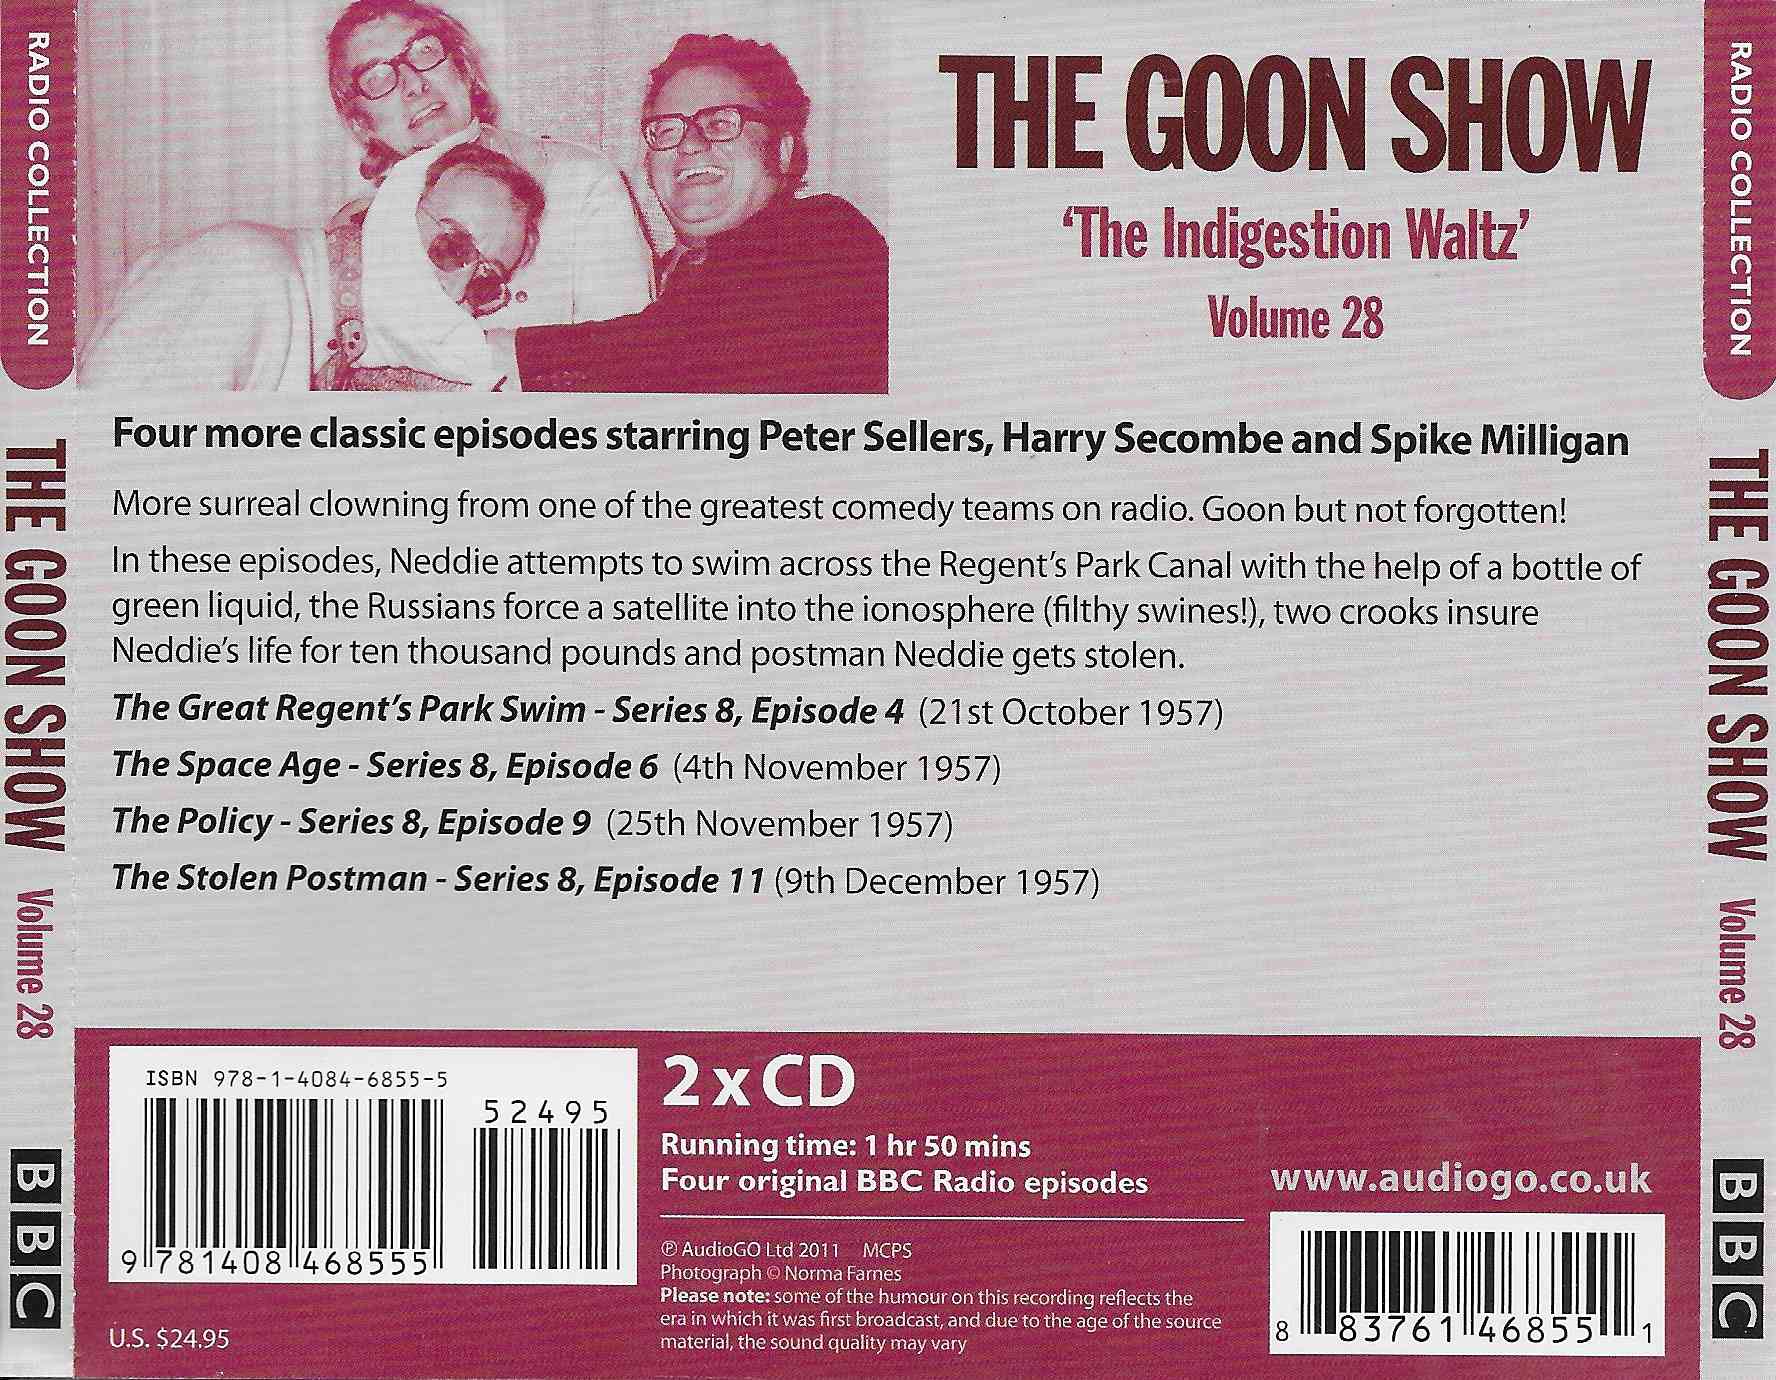 Picture of ISBN 978-1-4084-6855-5 The Goon Show 28 - The indigestion waltz by artist Spike Milligan / Larry Stephens from the BBC records and Tapes library